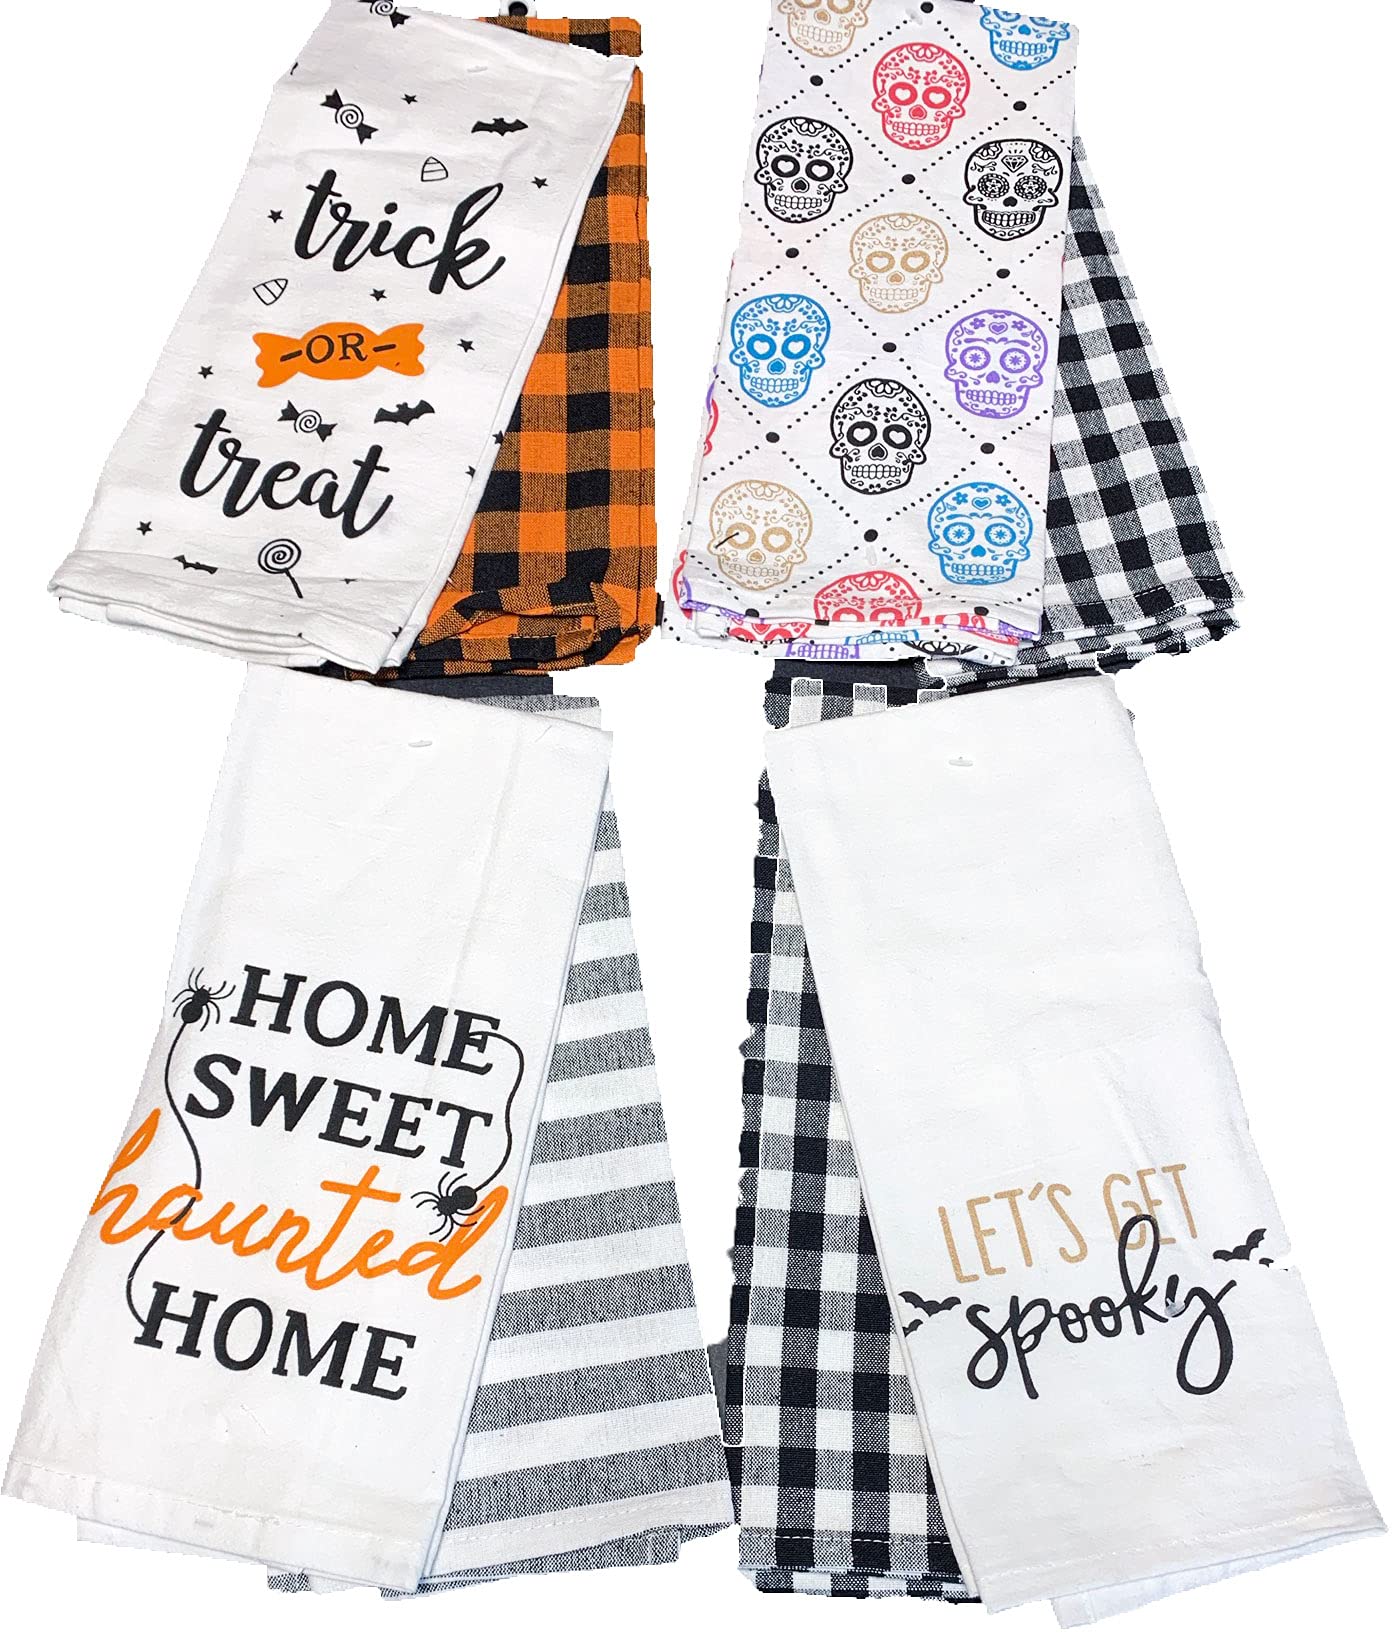 Twisted Anchor Trading Company Halloween Kitchen Towels - Set of 8 Flour Sack Fall Plaid Kitchen Towels Gift Set - Fall Kitchen Towel Set - Comes in Organza Gift Bag